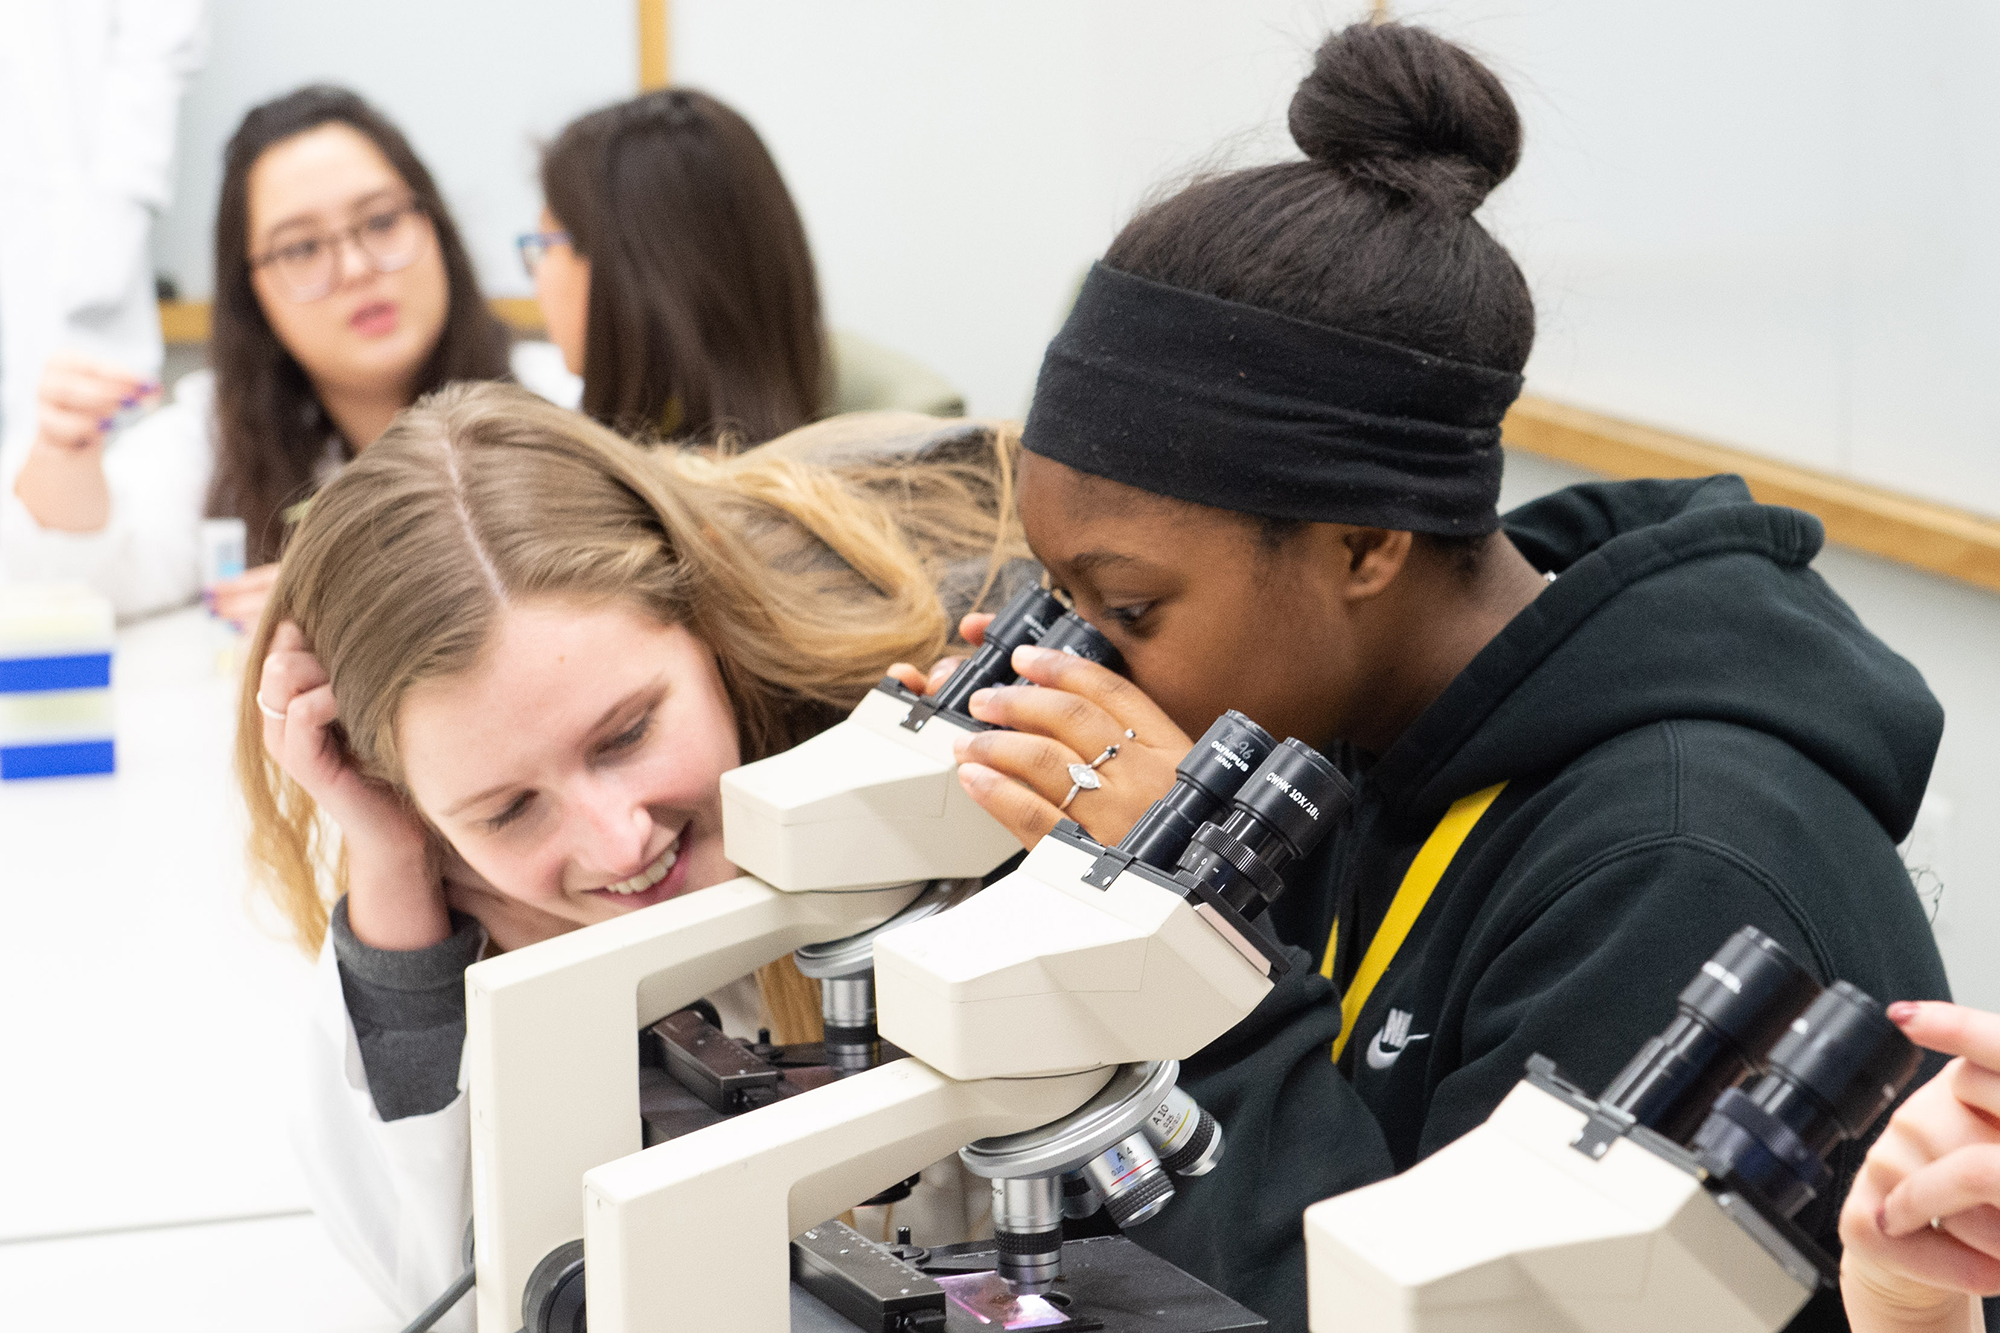 Girls Go STEM participants work with microscopes